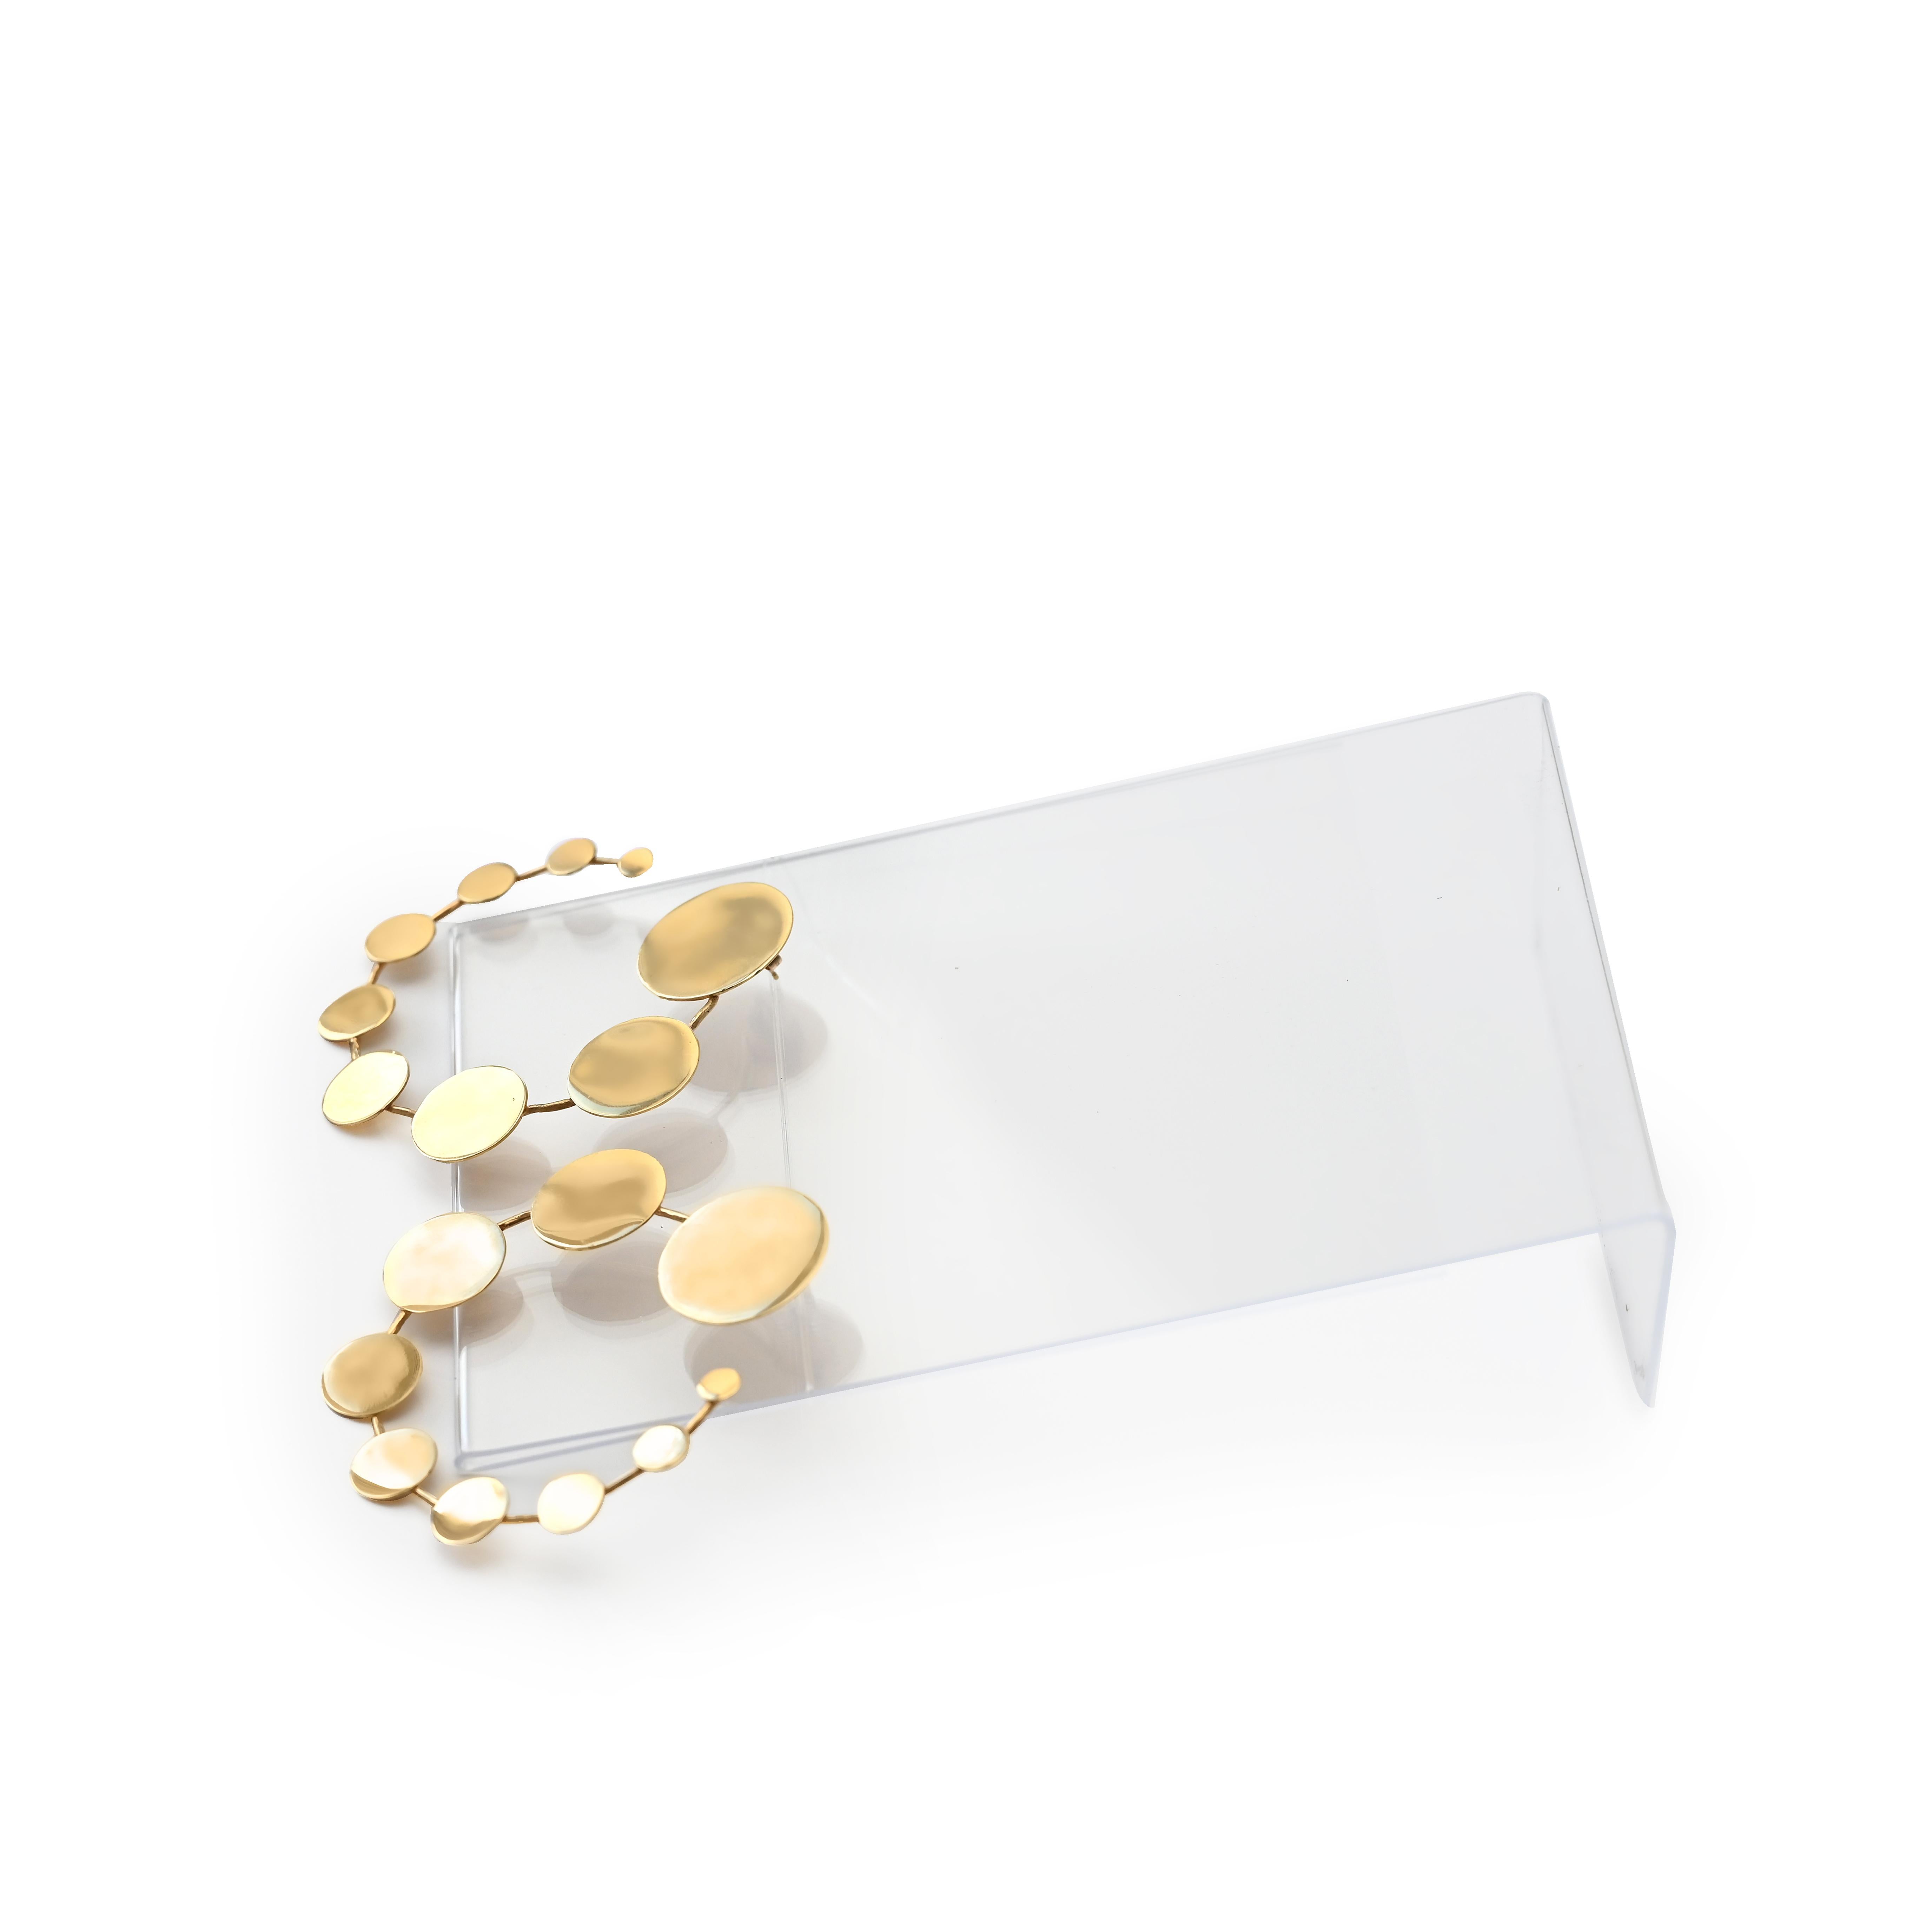 14k Gold Vermeil 9 Disk Hoop Earrings -The geometric design is the classic hoop reimagined, signifying the process of gradually moving forward towards a more progressive capacity. The gradual steps that will eventually lead to something exceptional.